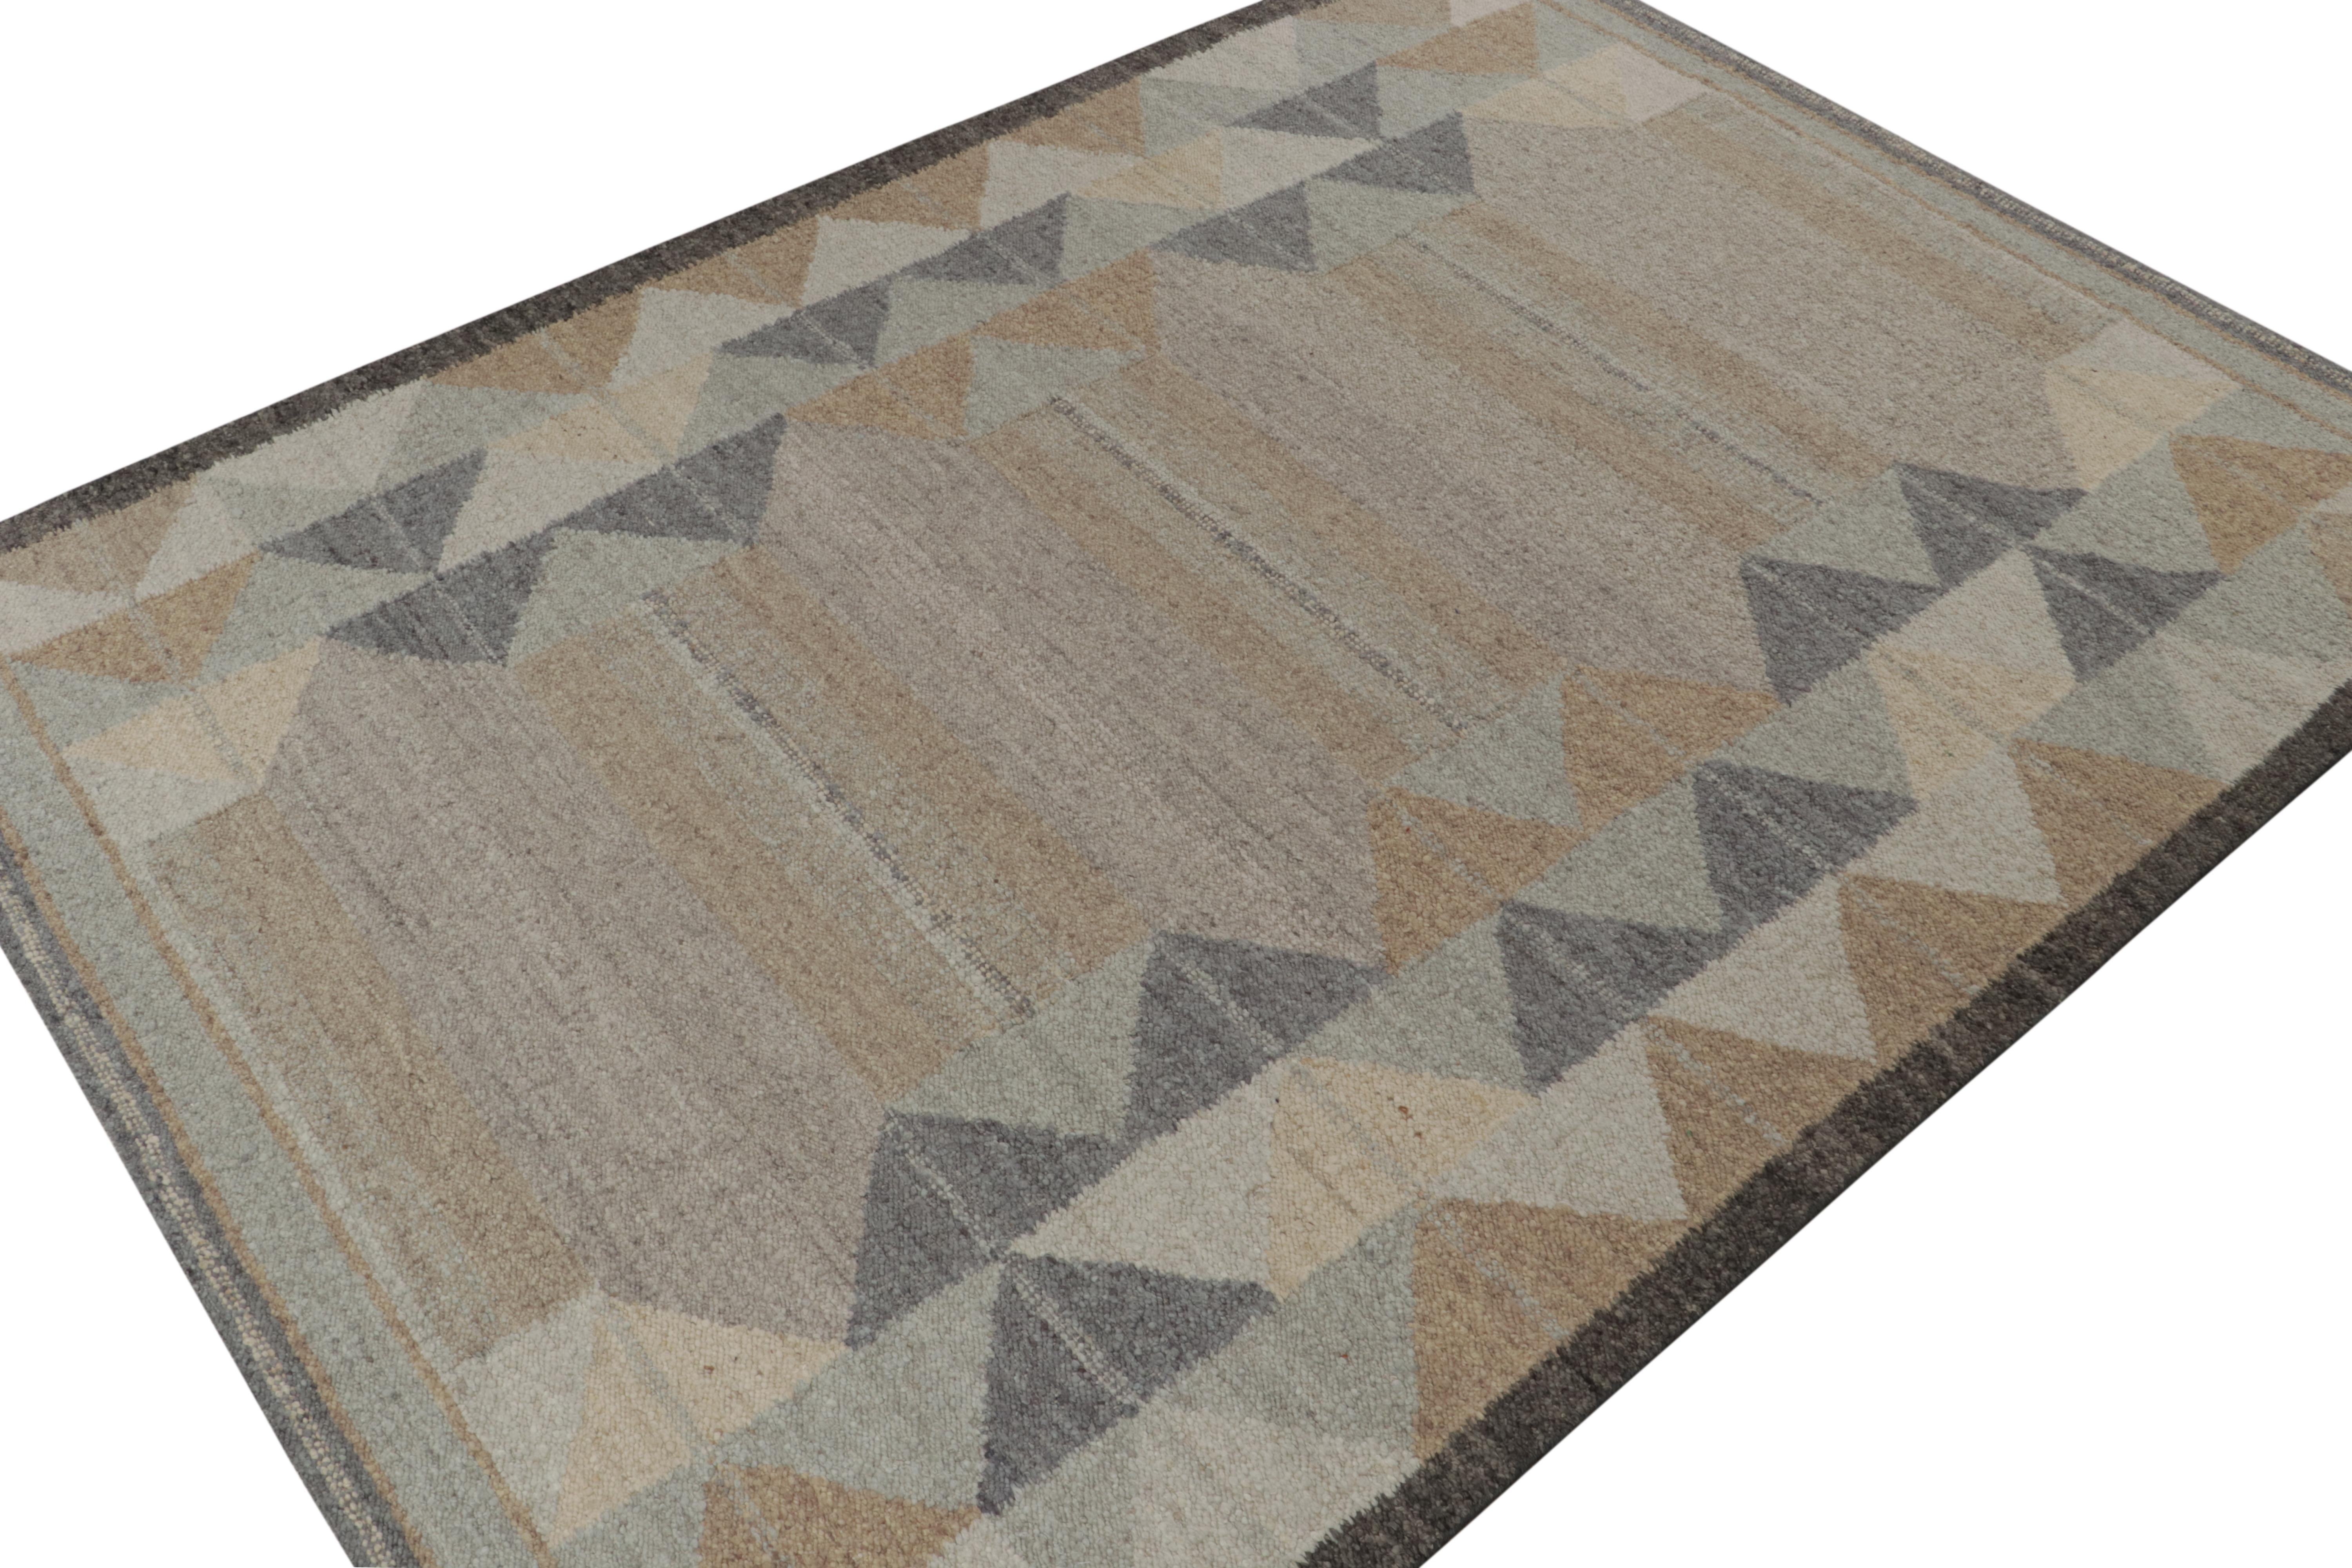 This 10x14 Swedish style kilim is from the inventive “Nu” texture in Rug & Kilim’s award-winning Scandinavian flat weave collection. Handwoven in wool. 

Further on the Design: 

This rug enjoys a boucle-like texture of blended yarns, and a look